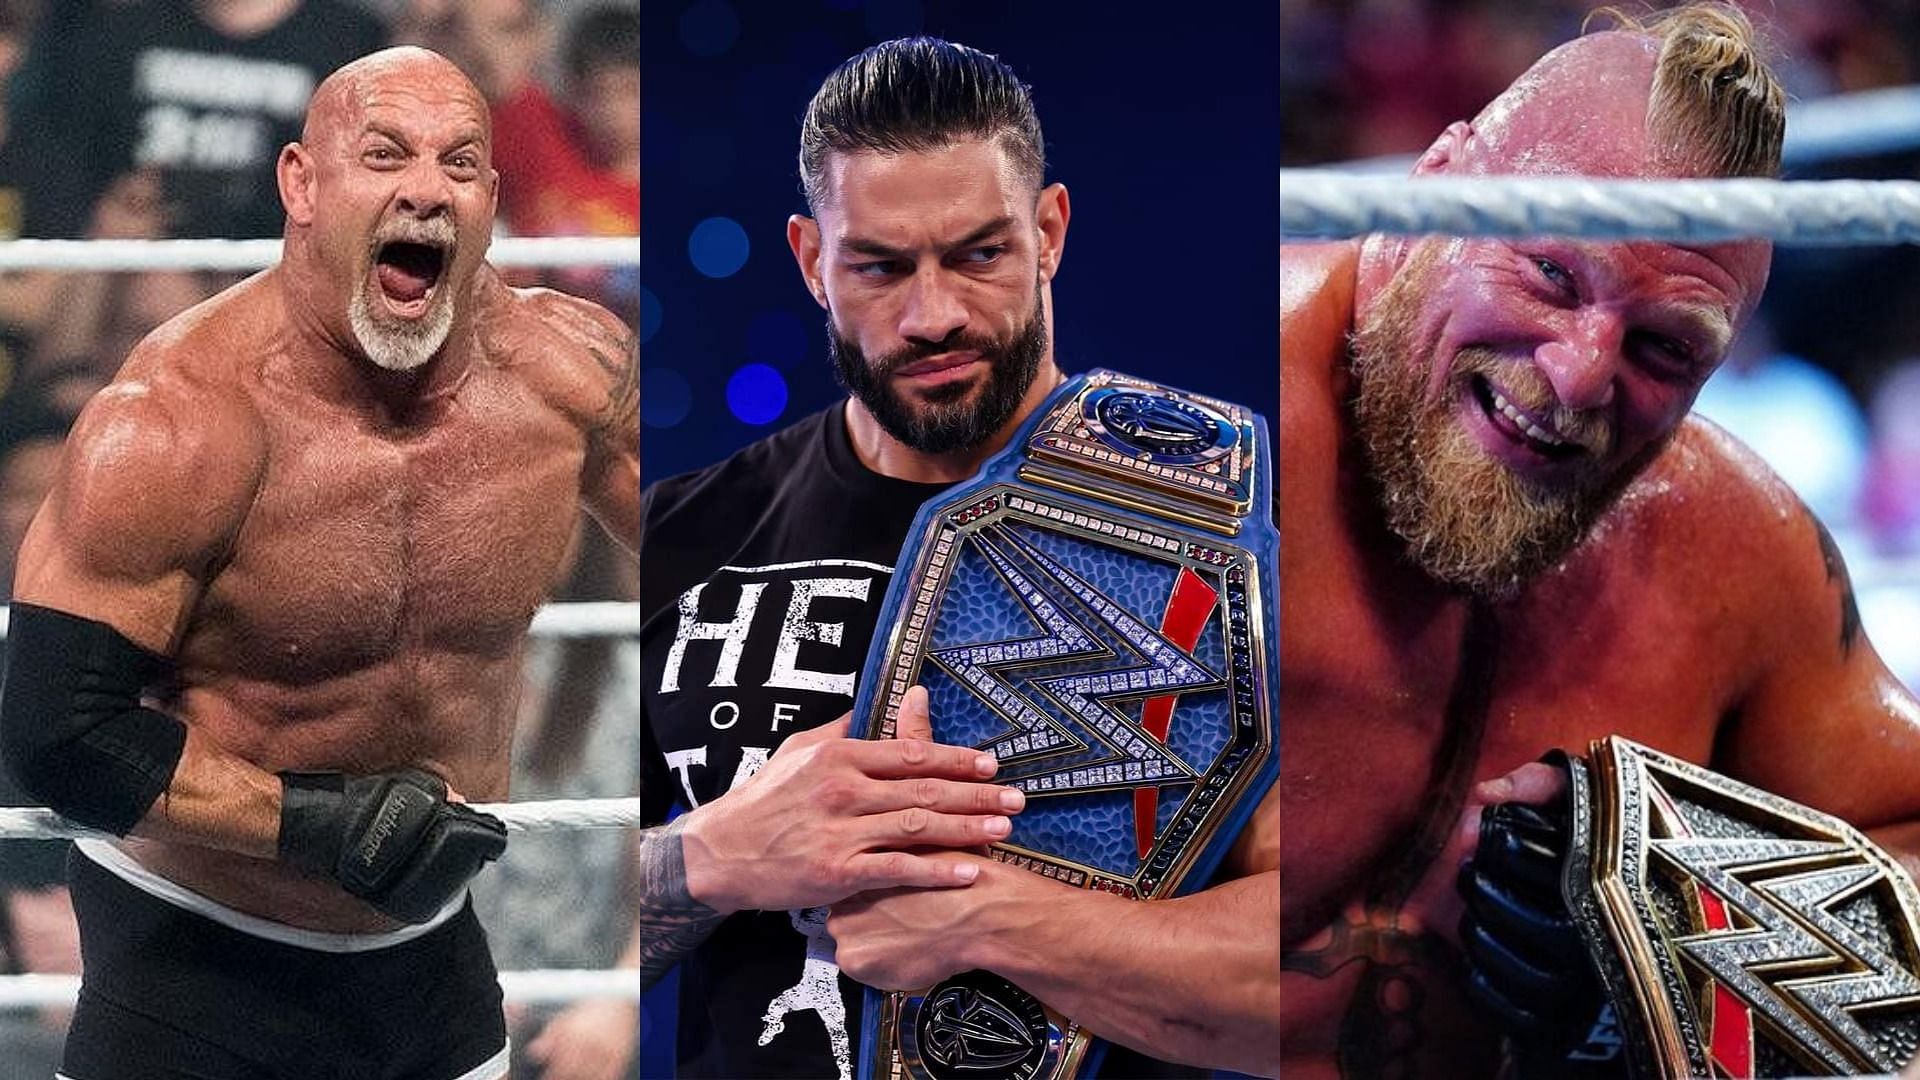 Who could Roman Reigns go up against next?